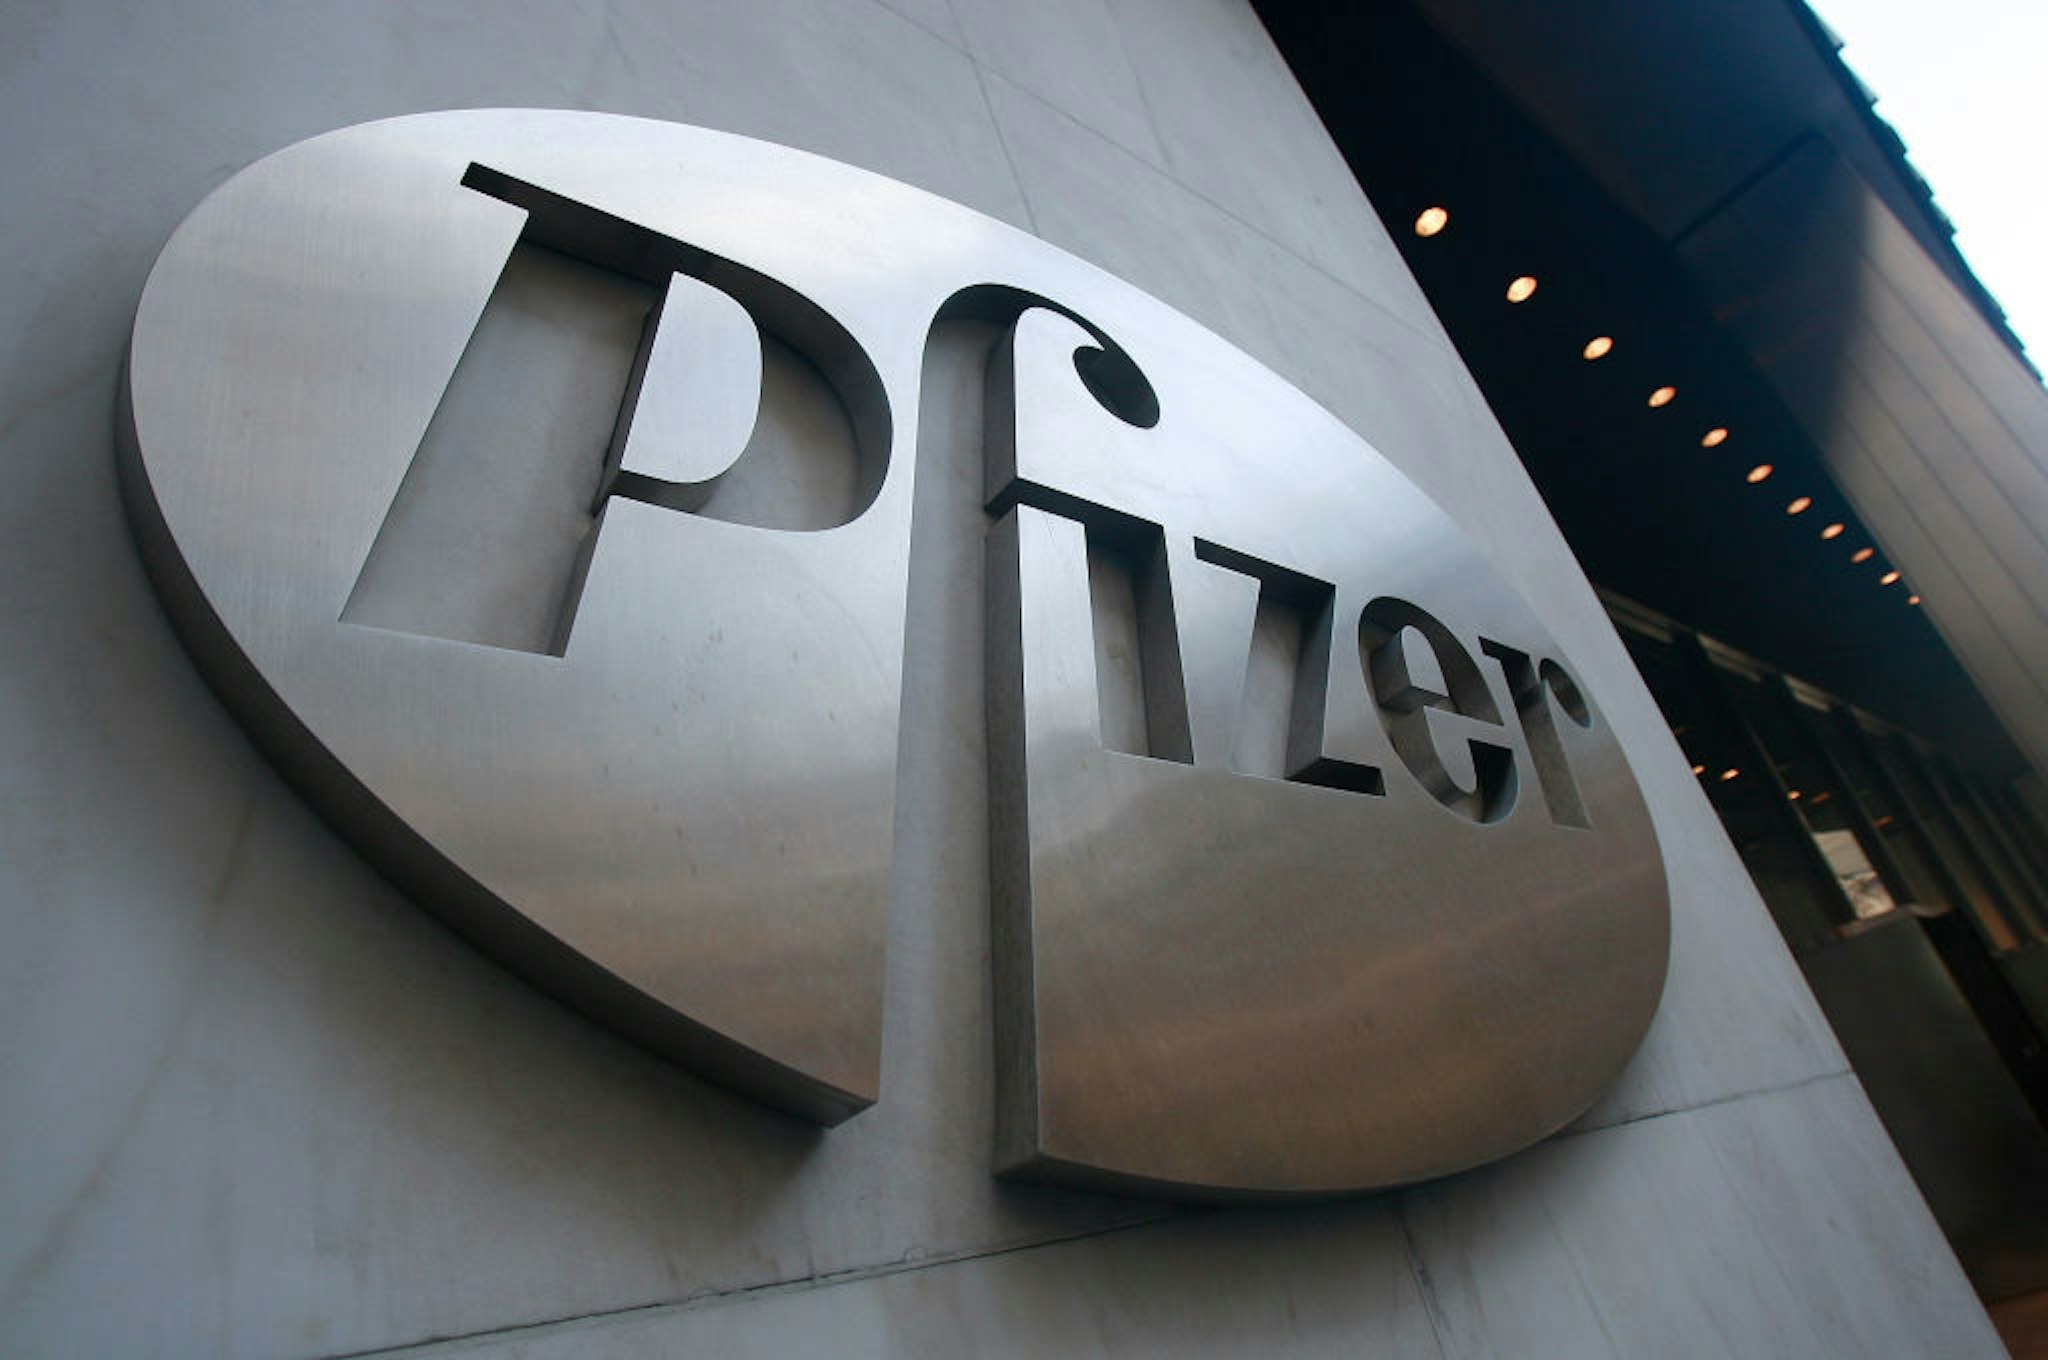 NEW YORK - JANUARY 26: A Pfizer sign hangs on the outside of their headquarters after a news conference discussing the planned merger of Pfizer and Wyeth January 26, 2009 in New York City. Pfizer plans to acquire Wyeth for $68 billion creating the world's largest biopharmaceutical company.